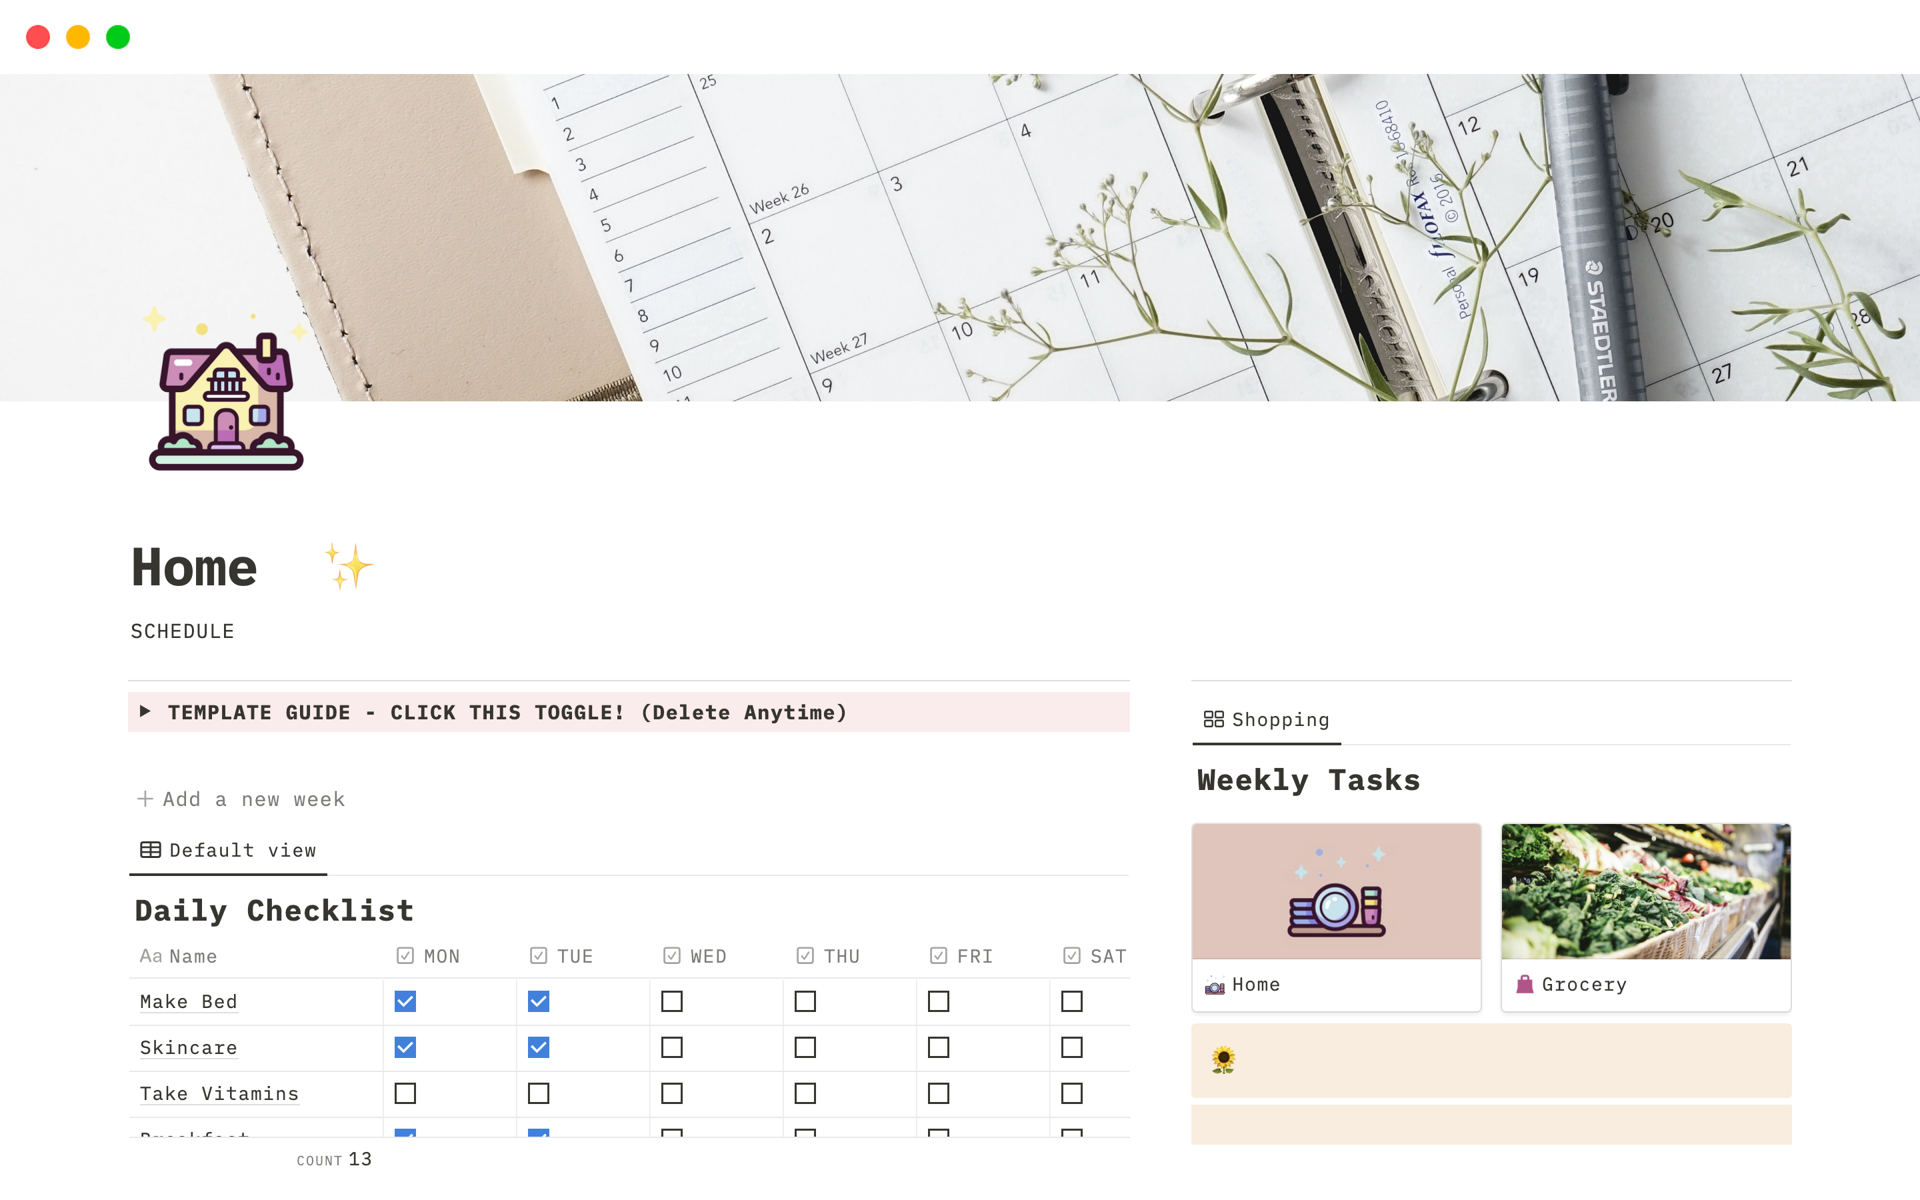 The Weekly Task tracker by Area has a handy little feature of showing you what's due today. It shows you a CHECKMARK and sorts itself to the top. Simple change the "scheduled for" to what day of the week you want to do it and it will automatically work.